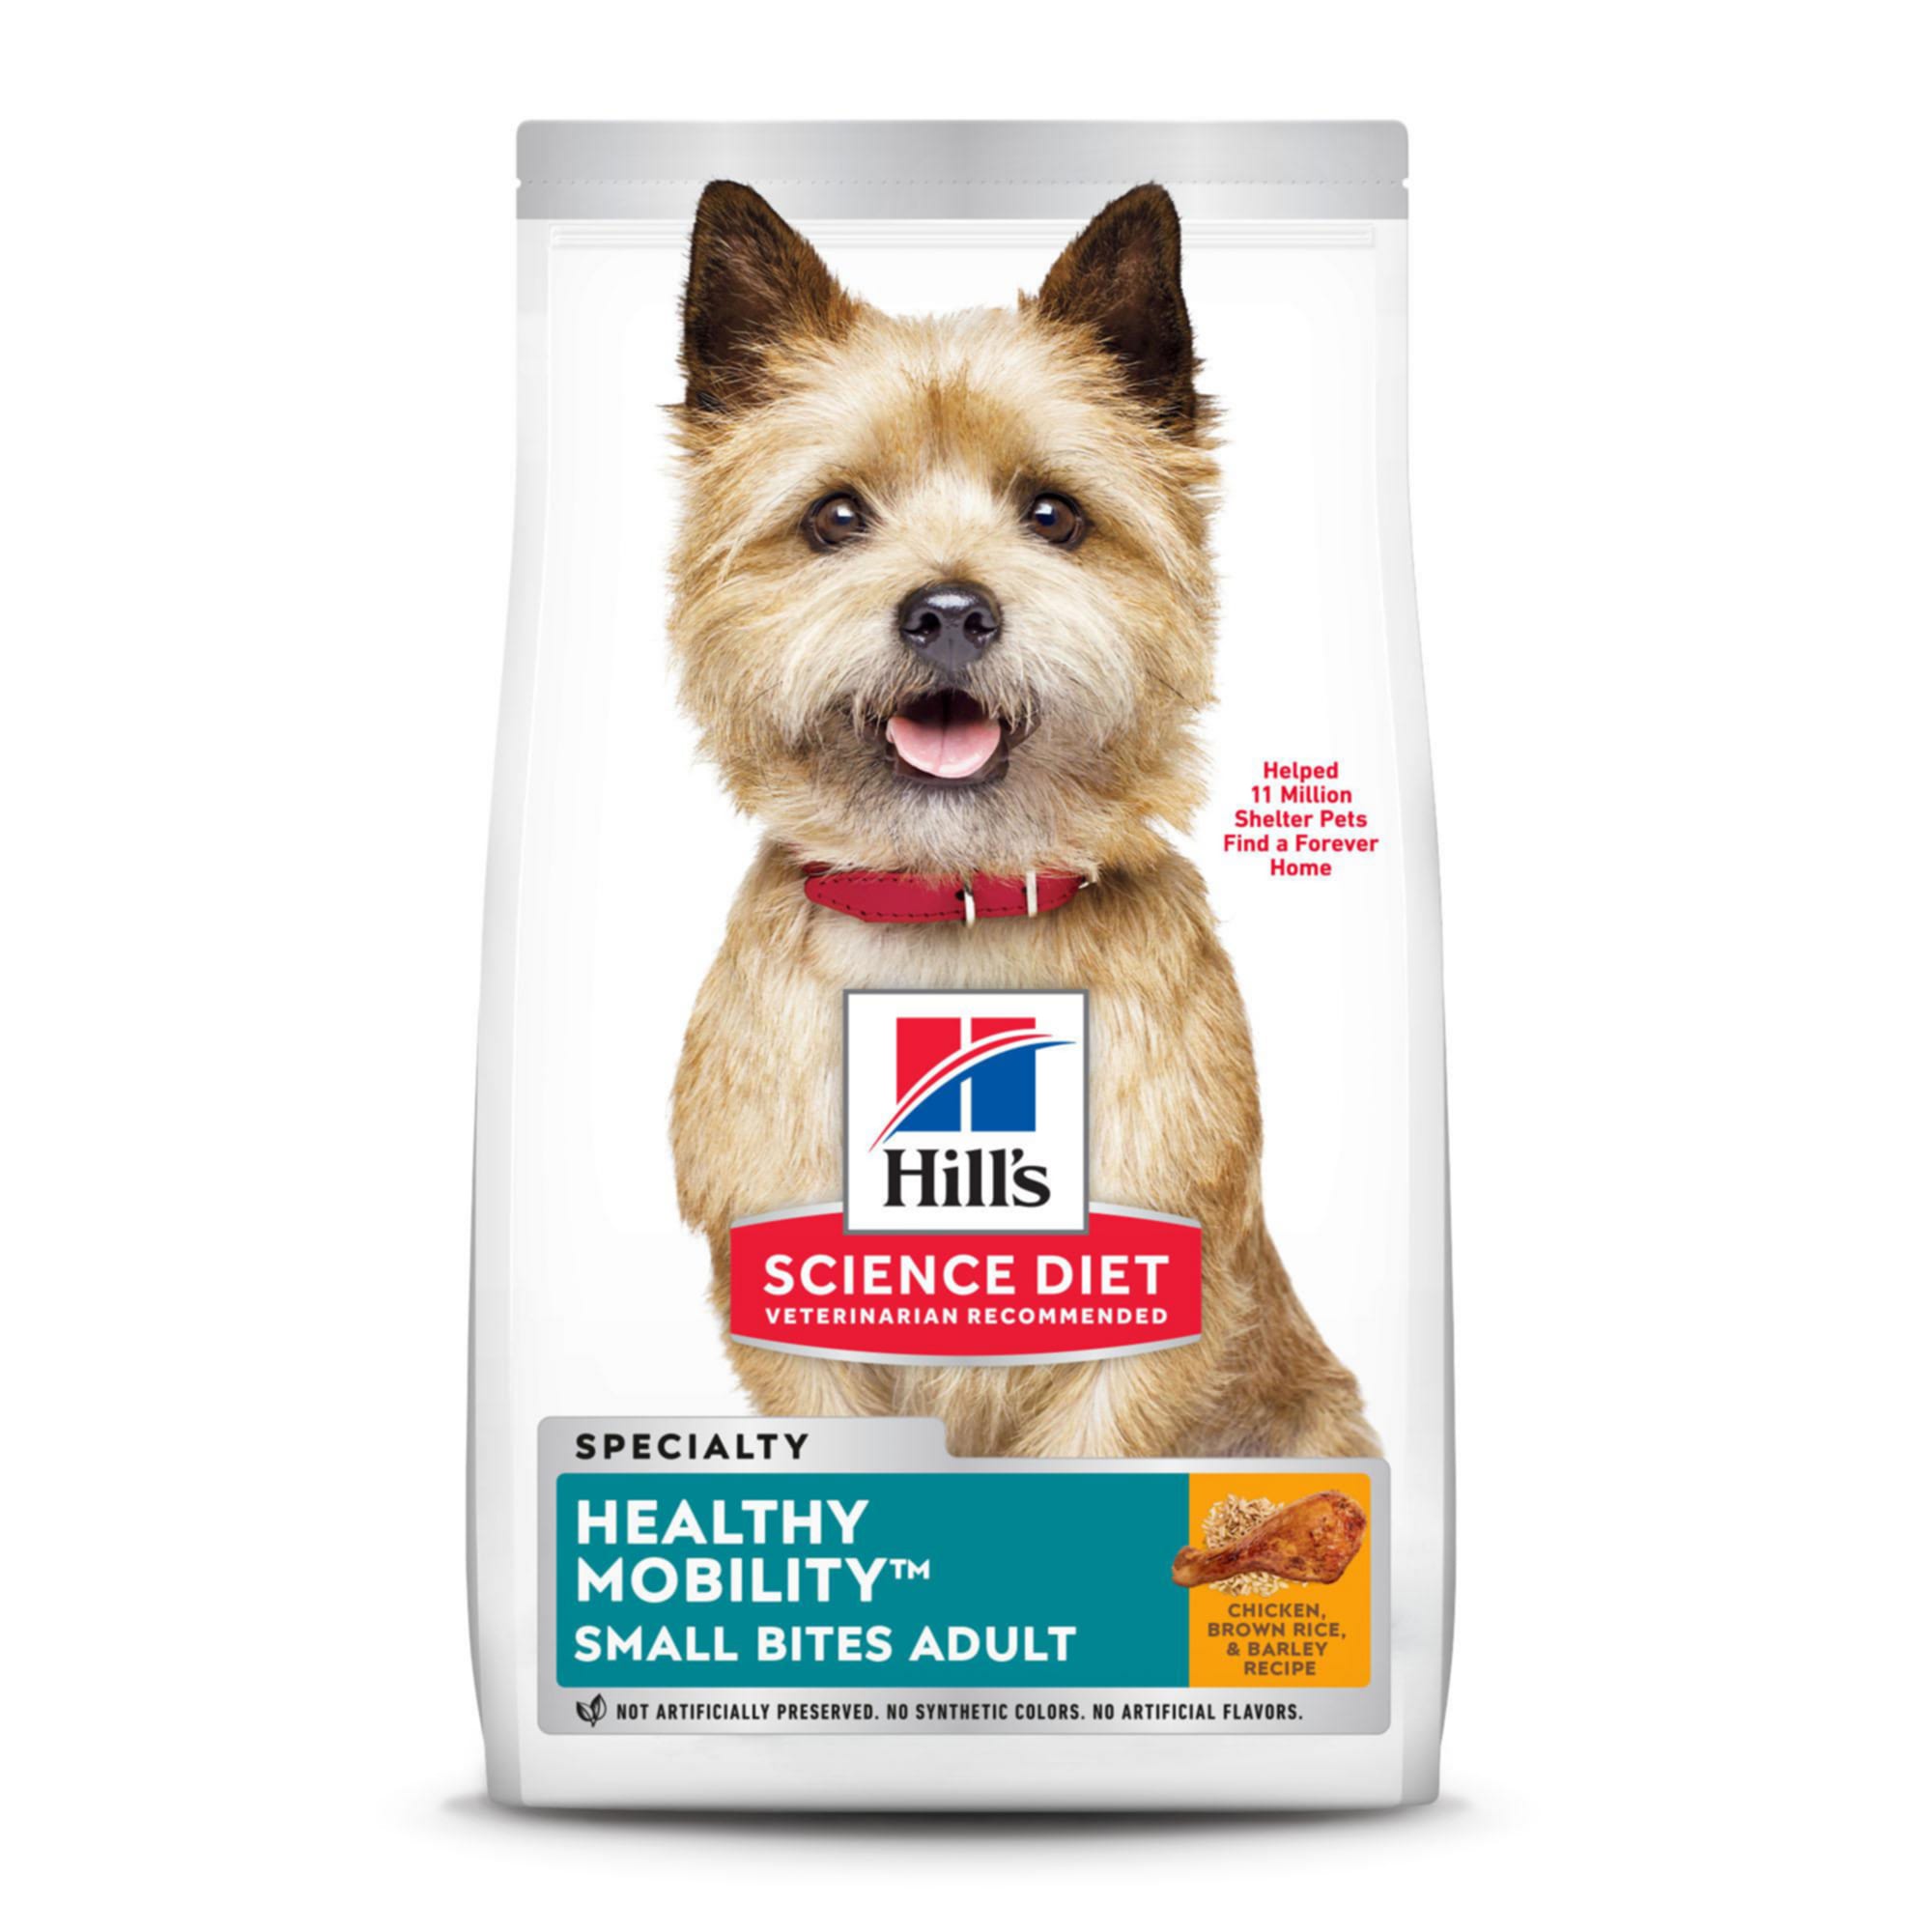 Lieve pakket maniac Hill's Science Diet Adult Healthy Mobility Small Bites Chicken Meal, Brown  Rice & Barley Recipe Dry Dog Food, 30 lbs., Bag | Petco